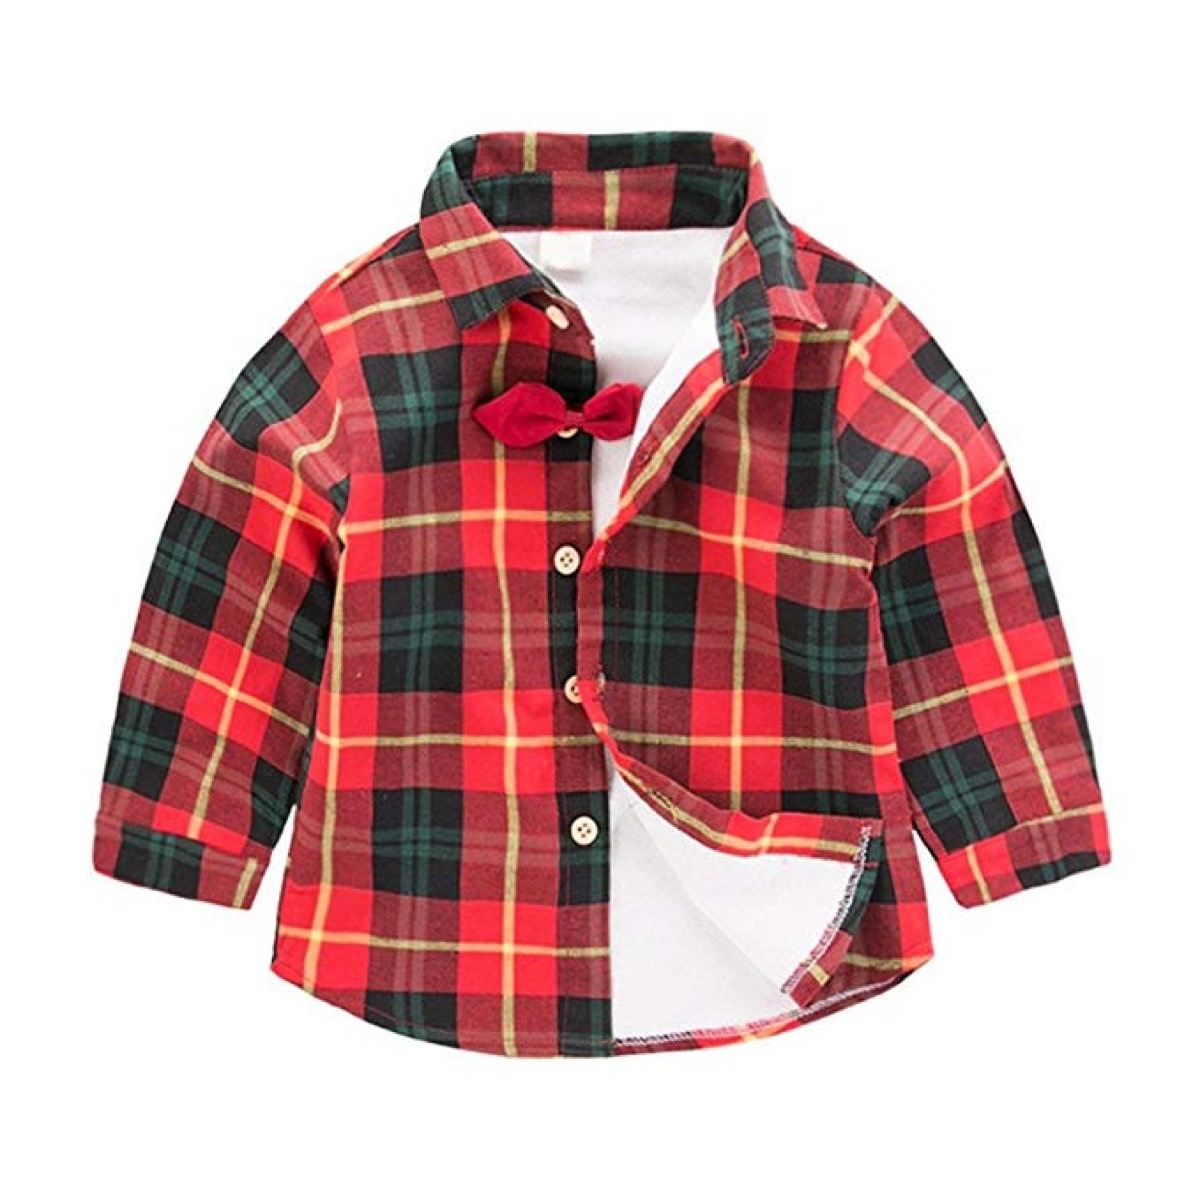 red and green plaid baby shirt